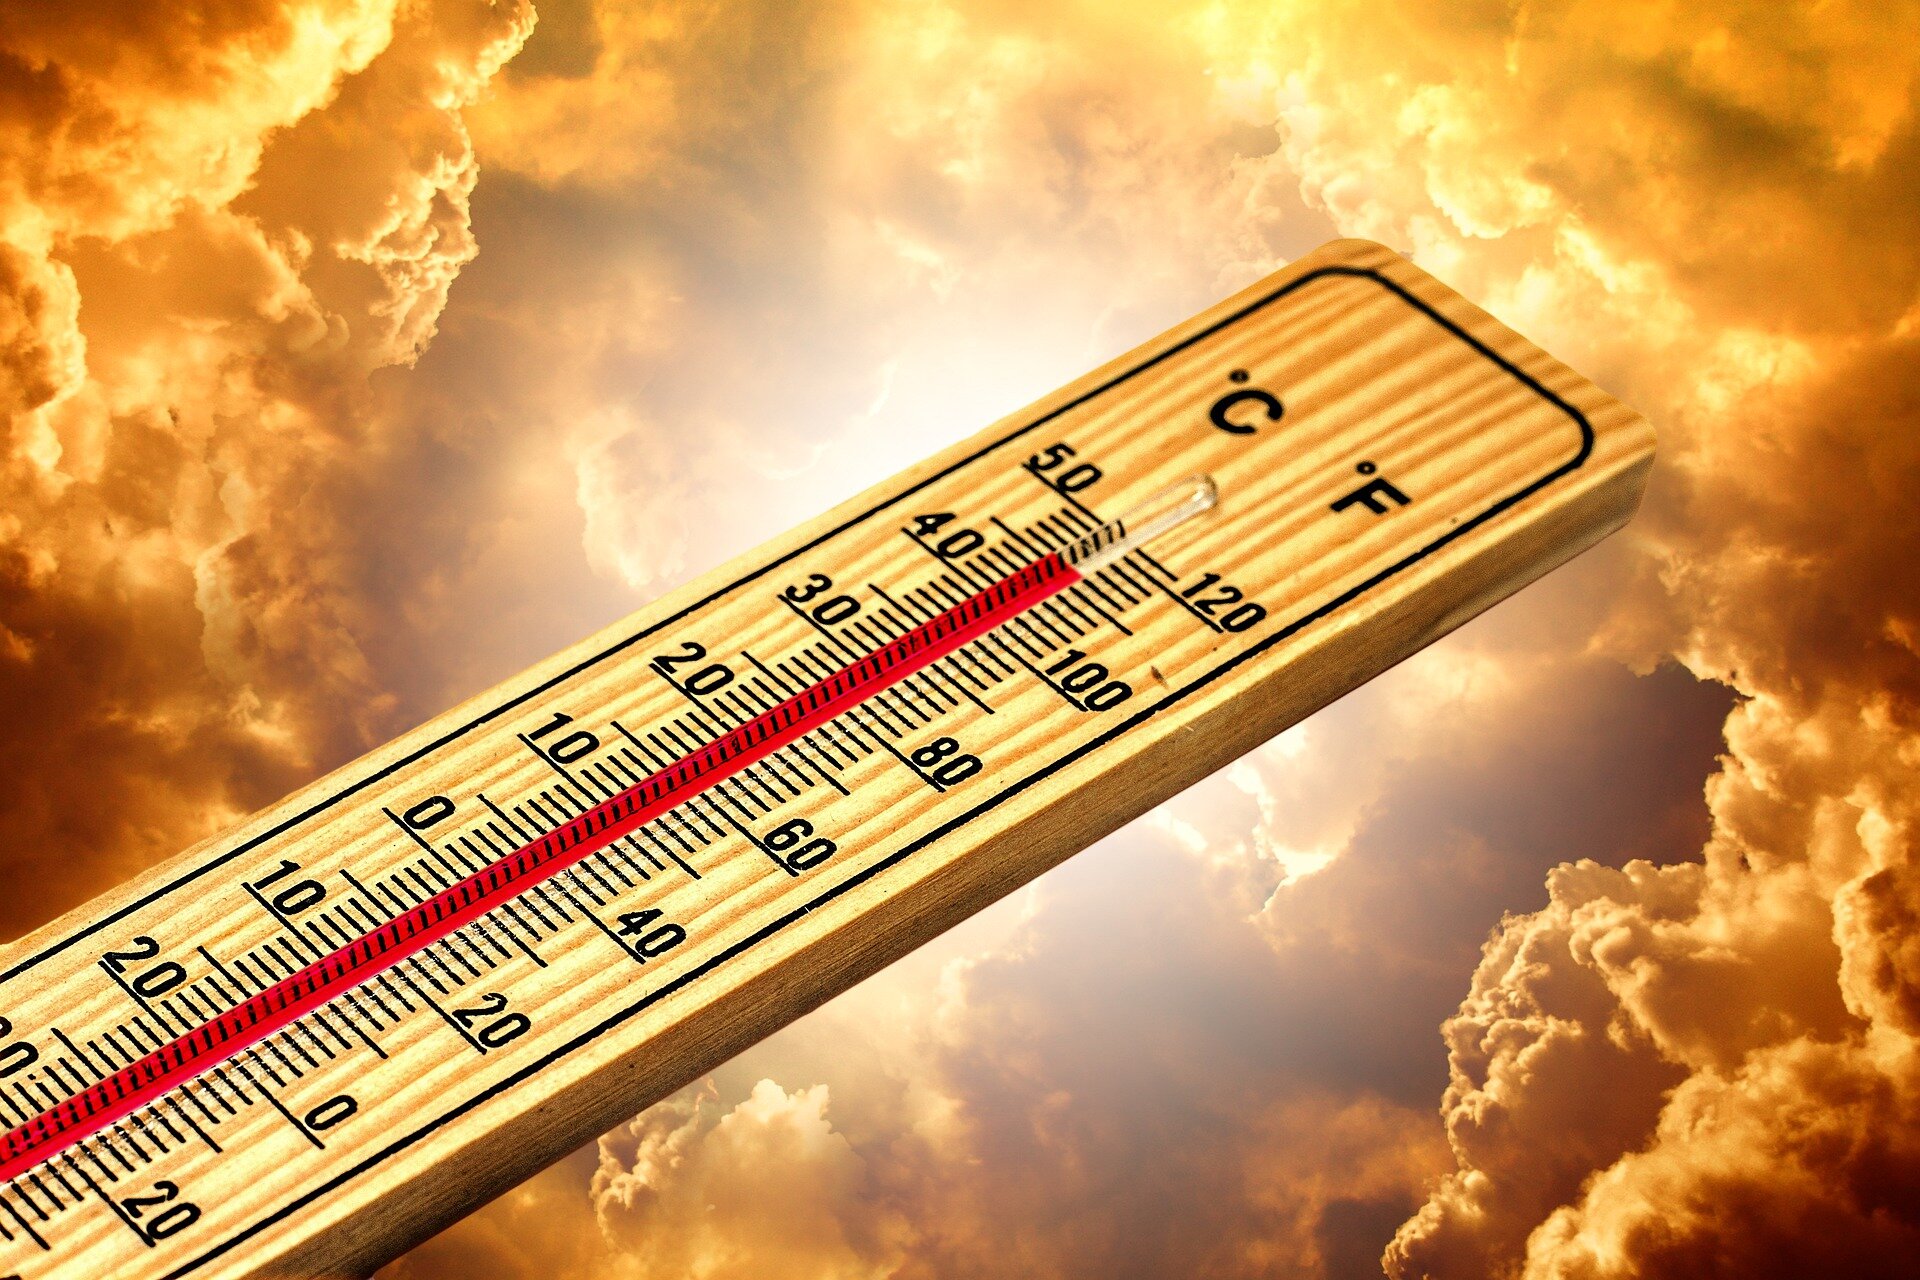 Extreme High Temperatures May Double Or Triple Heart Related Deaths